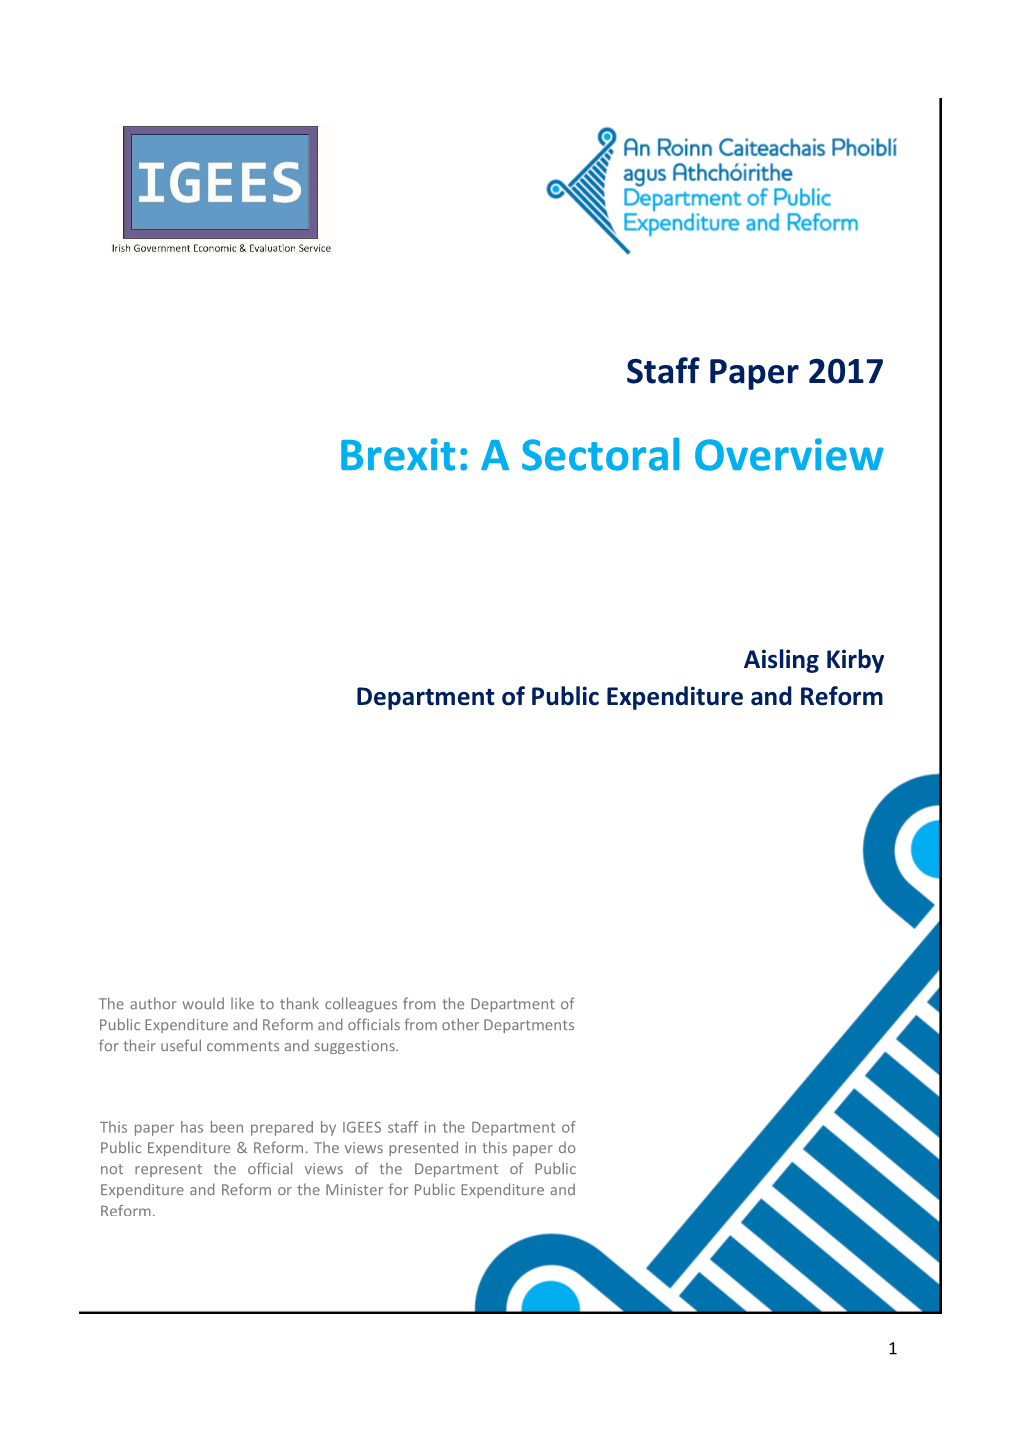 Brexit: a Sectoral Overview